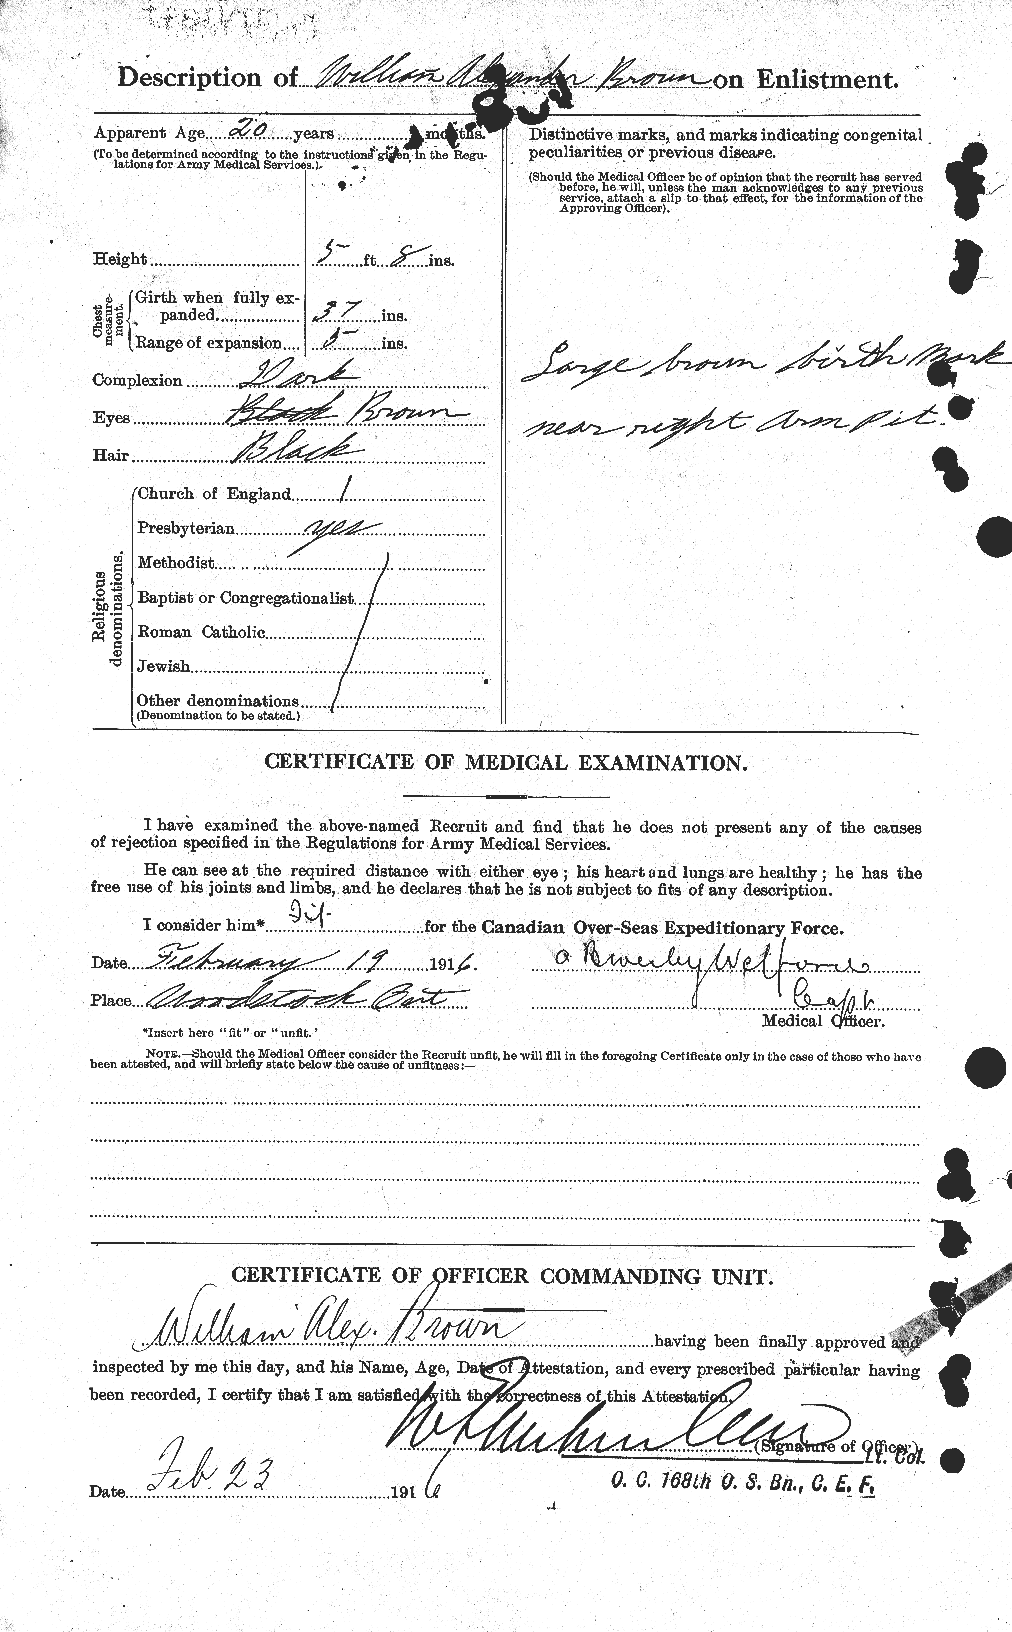 Personnel Records of the First World War - CEF 268213b